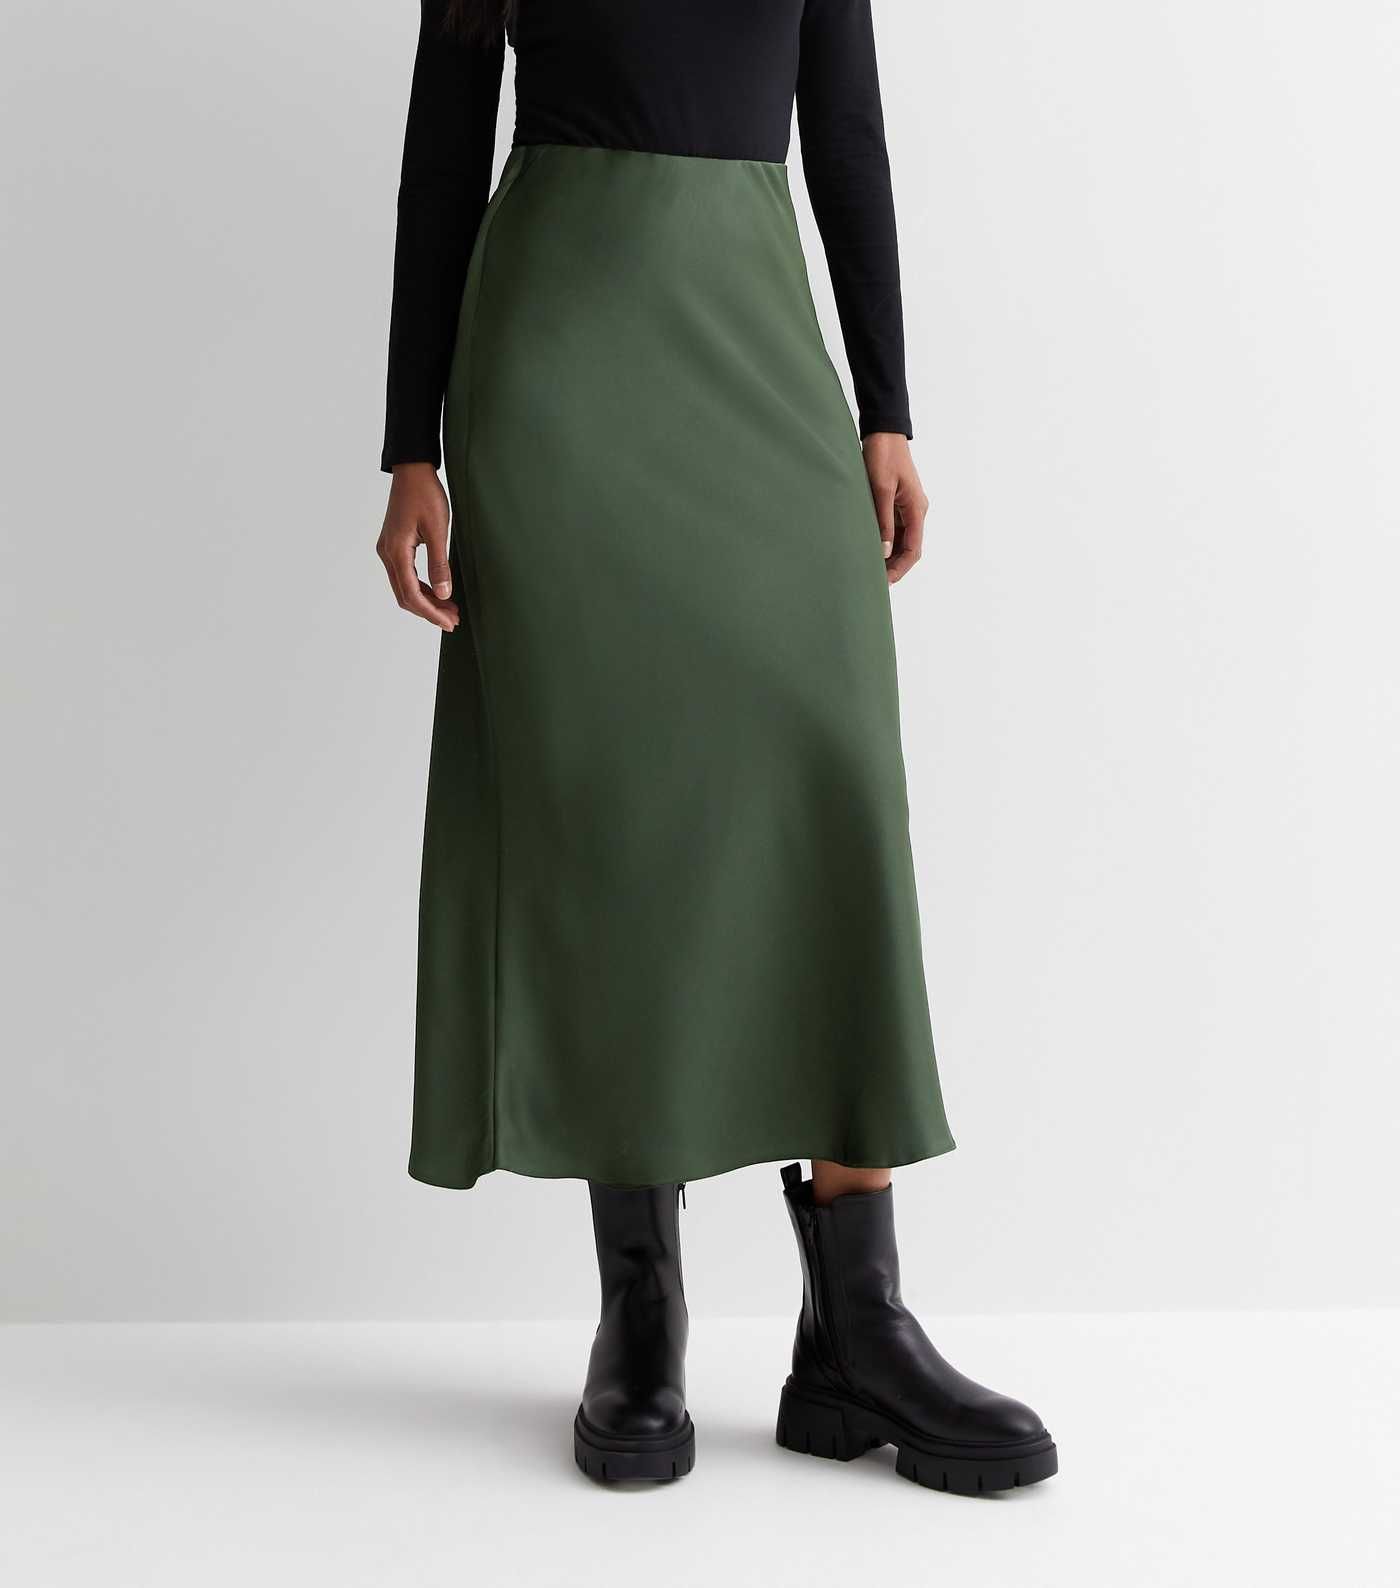 Dark Green Satin Bias Cut Midaxi Skirt
						
						Add to Saved Items
						Remove from Saved It... | New Look (UK)